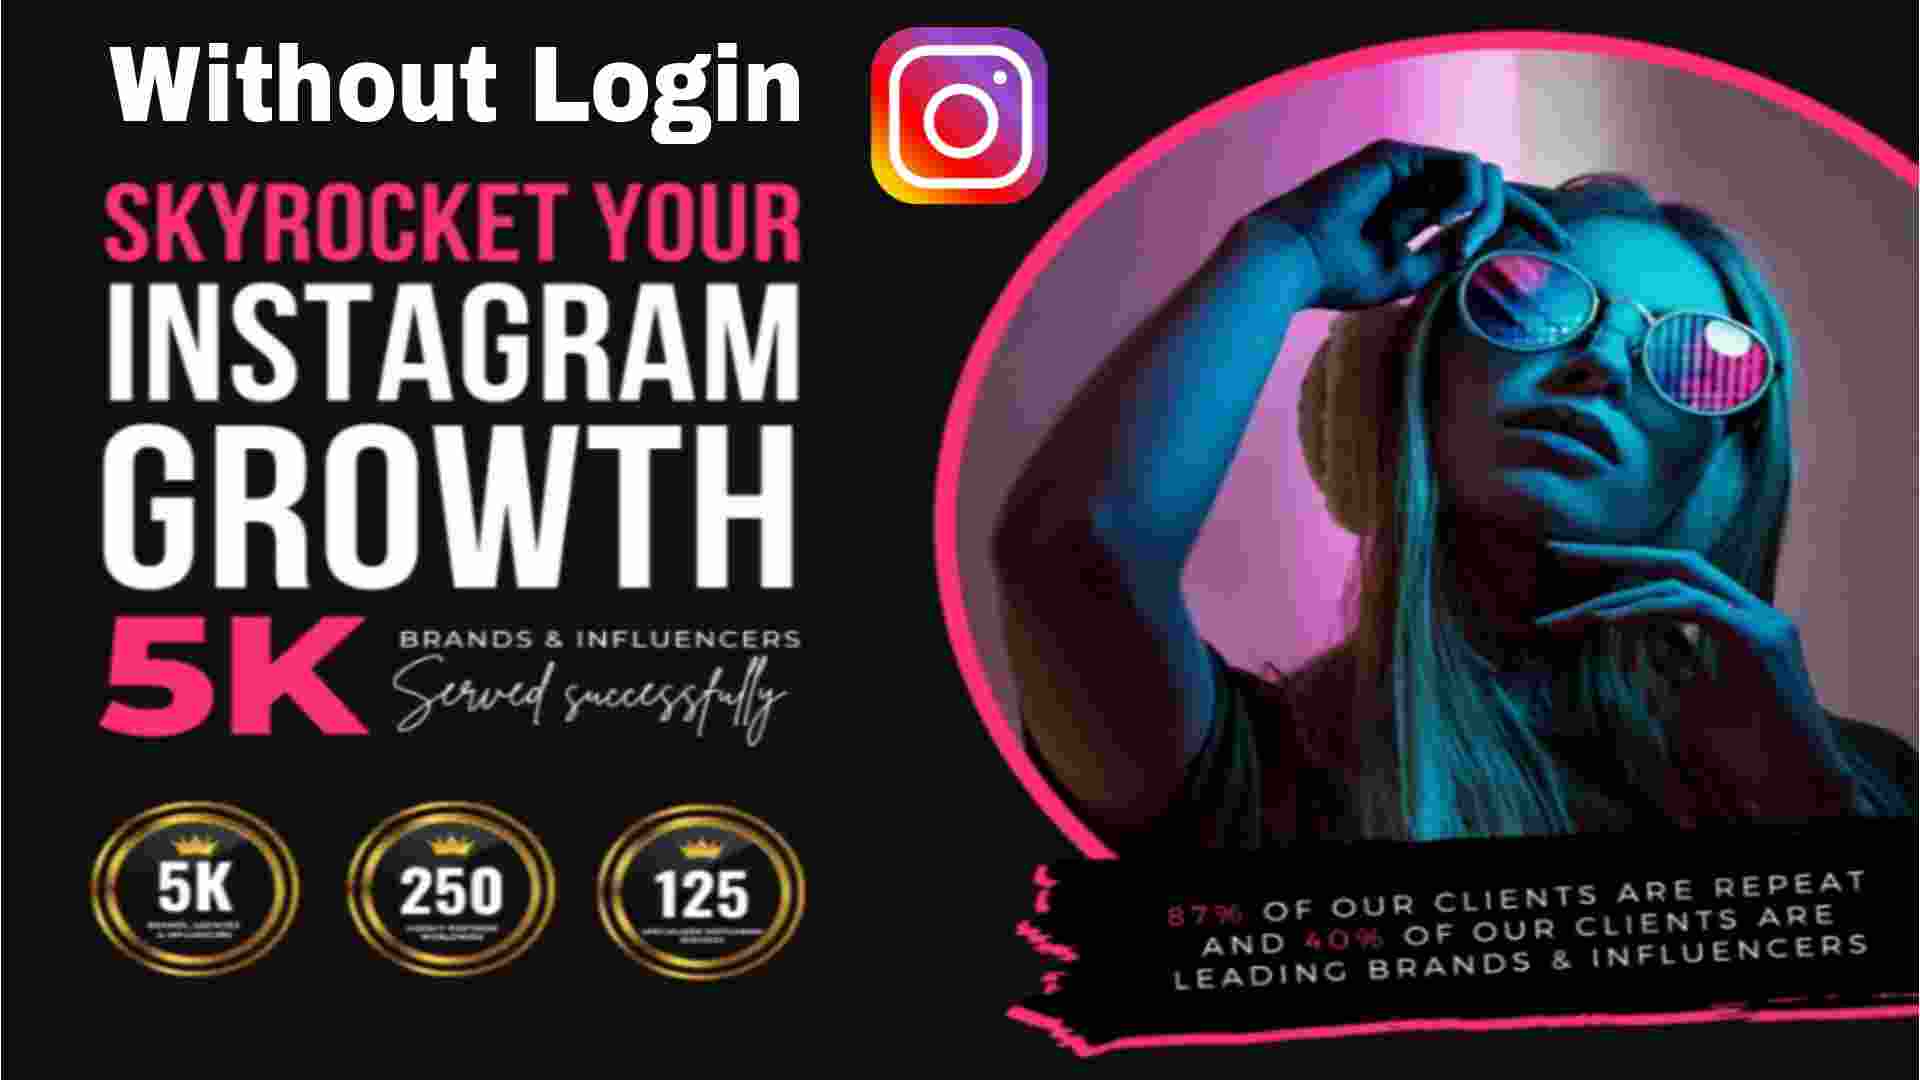 tools.rstricks- Get Free Followers On Instagram Without Login